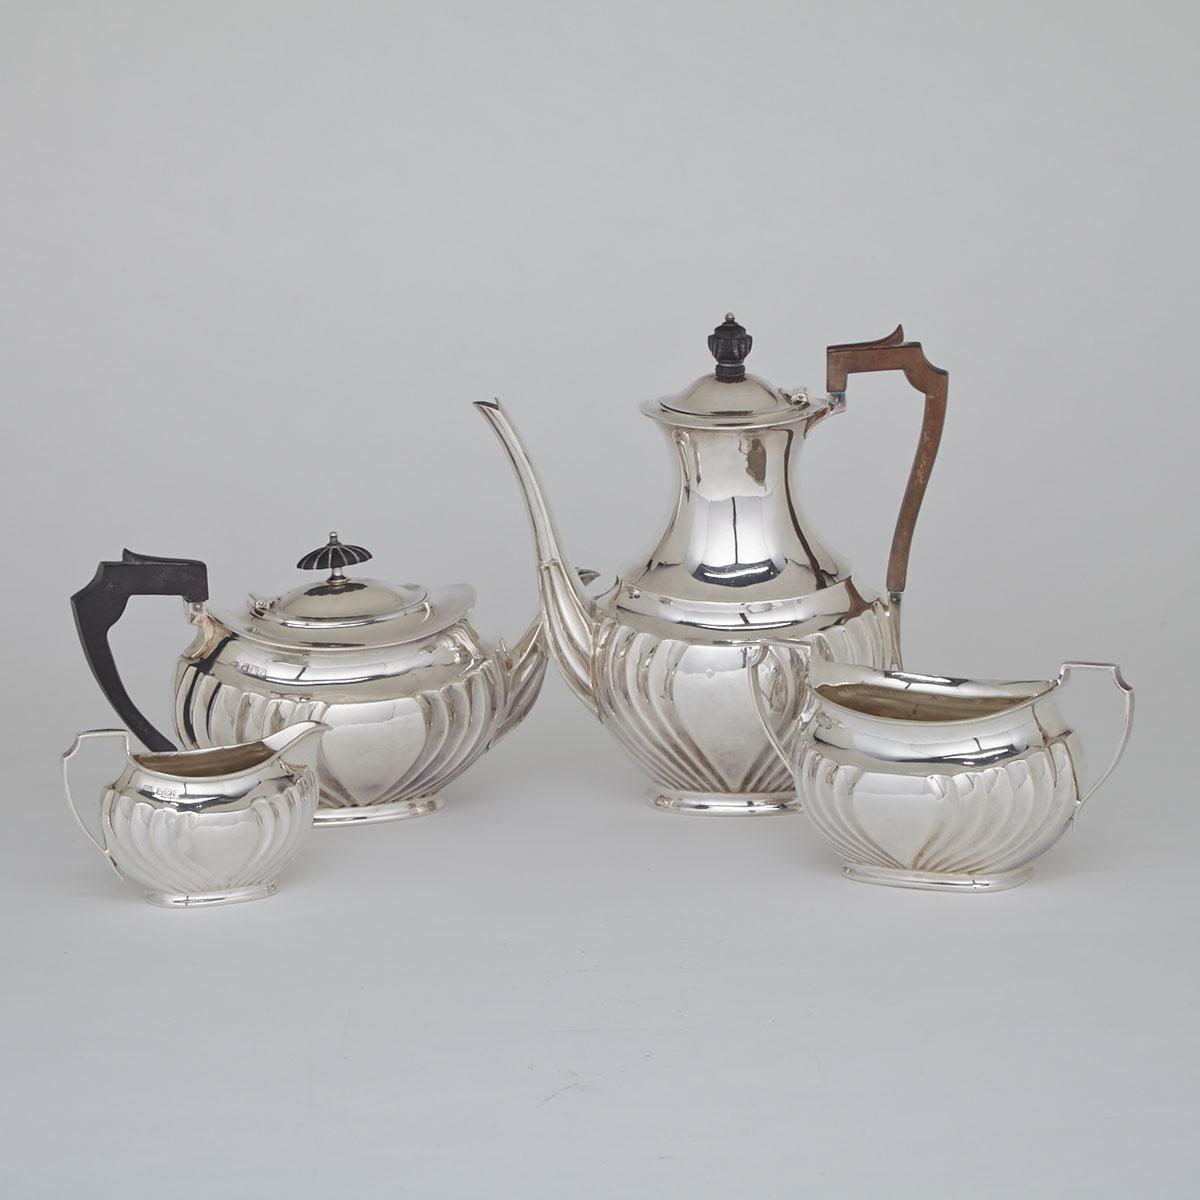 Victorian Silver Tea and Coffee Service, Henry Birks (probably), Sheffield, 1891/92